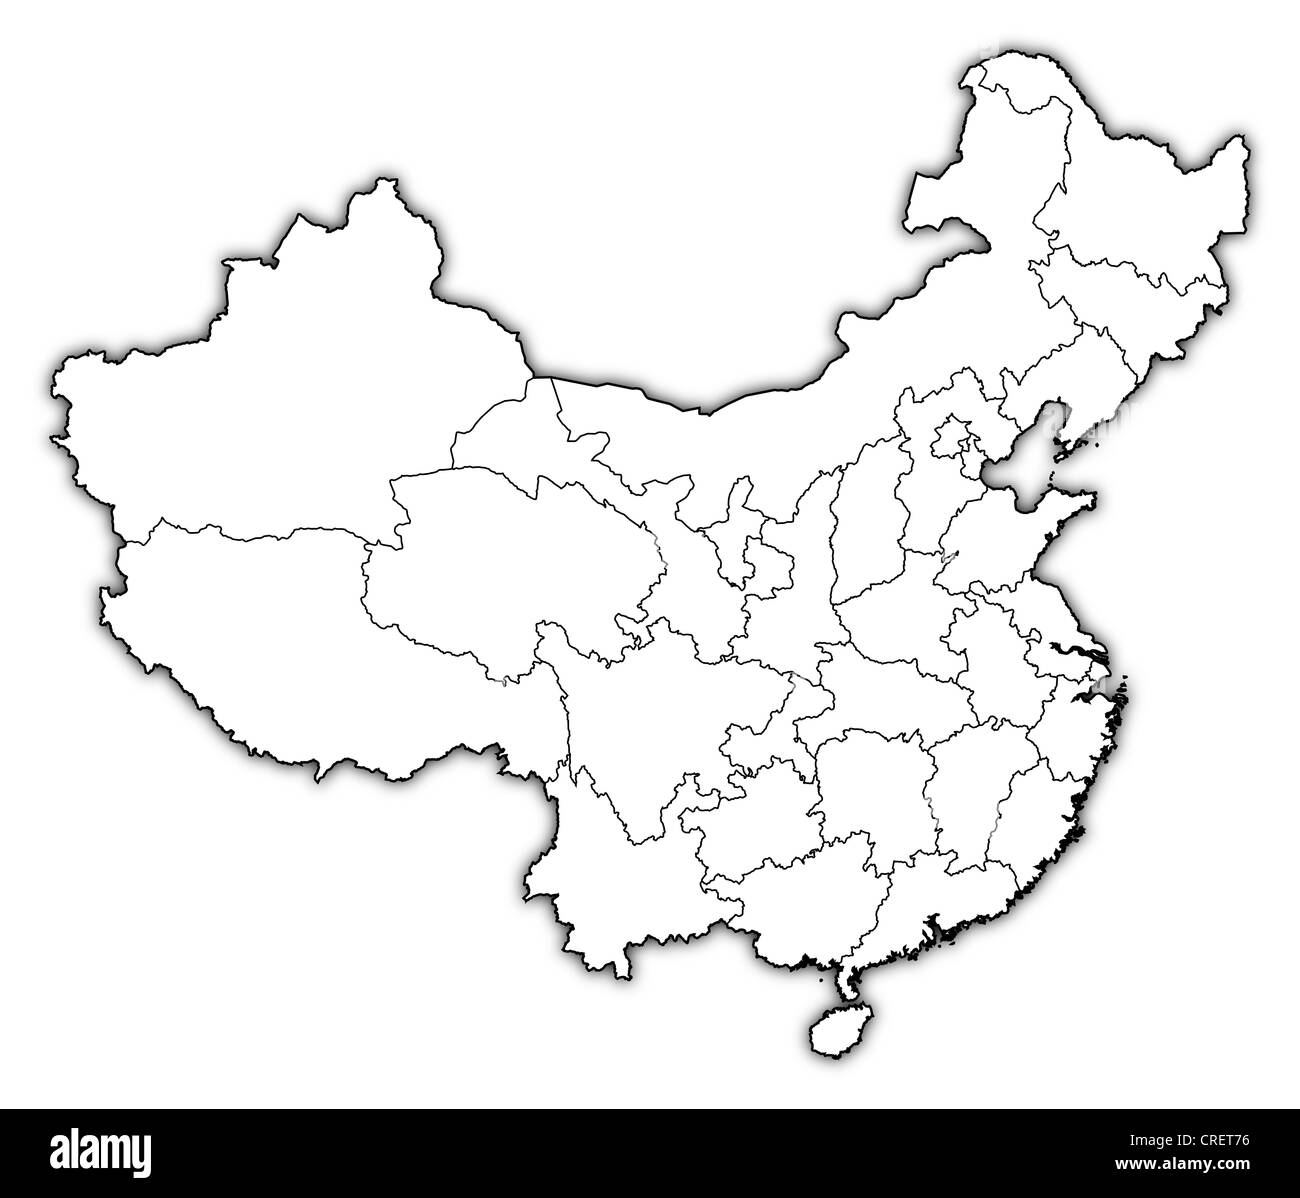 Map China Regions Black And White Stock Photos Images Alamy